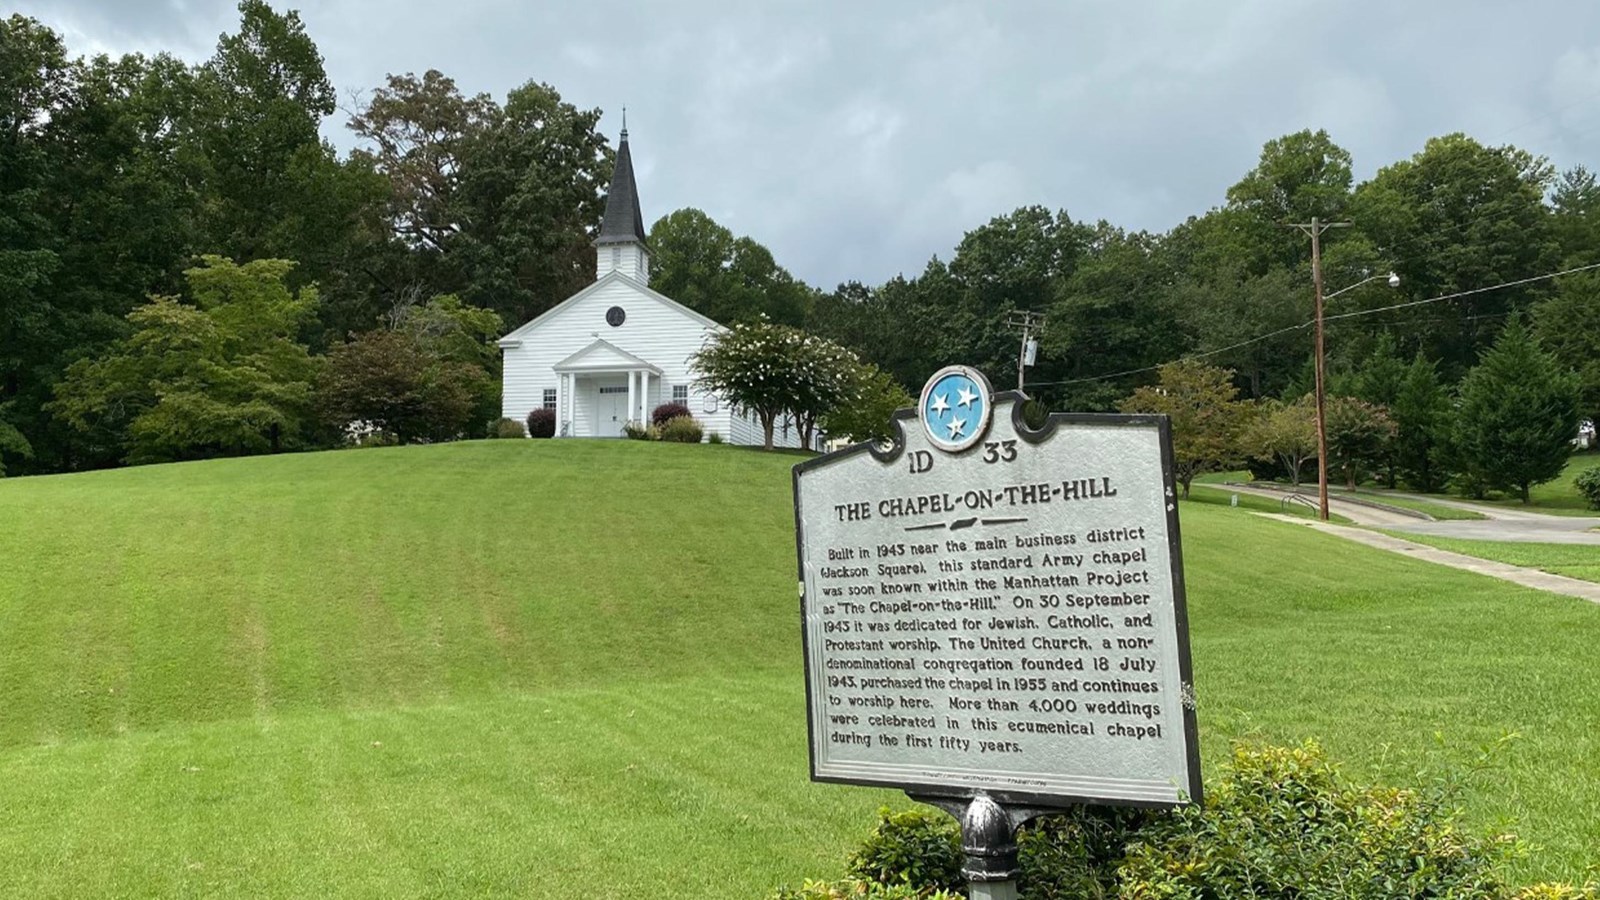 A white chapel on a grassy hill with historical marker in foreground